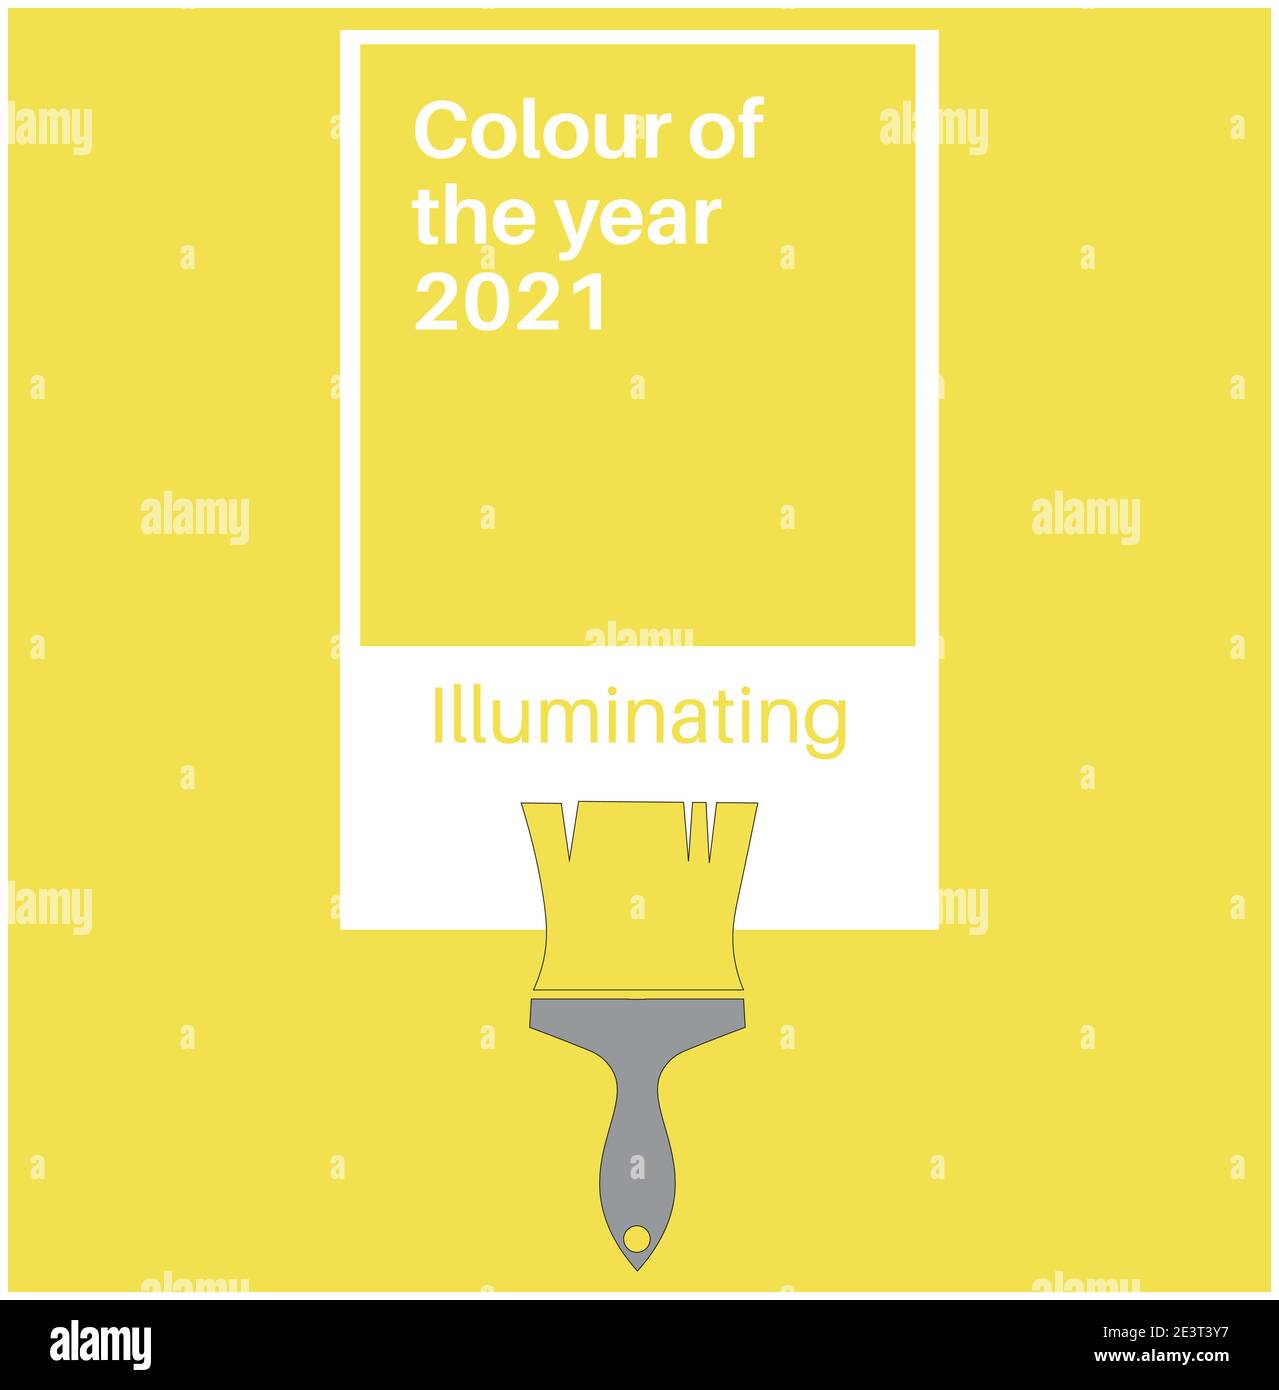 Ultimate Gray and Illuminating Yellow Trending Colors of the Year 2021. Color pattern, vector  illustration Stock Vector